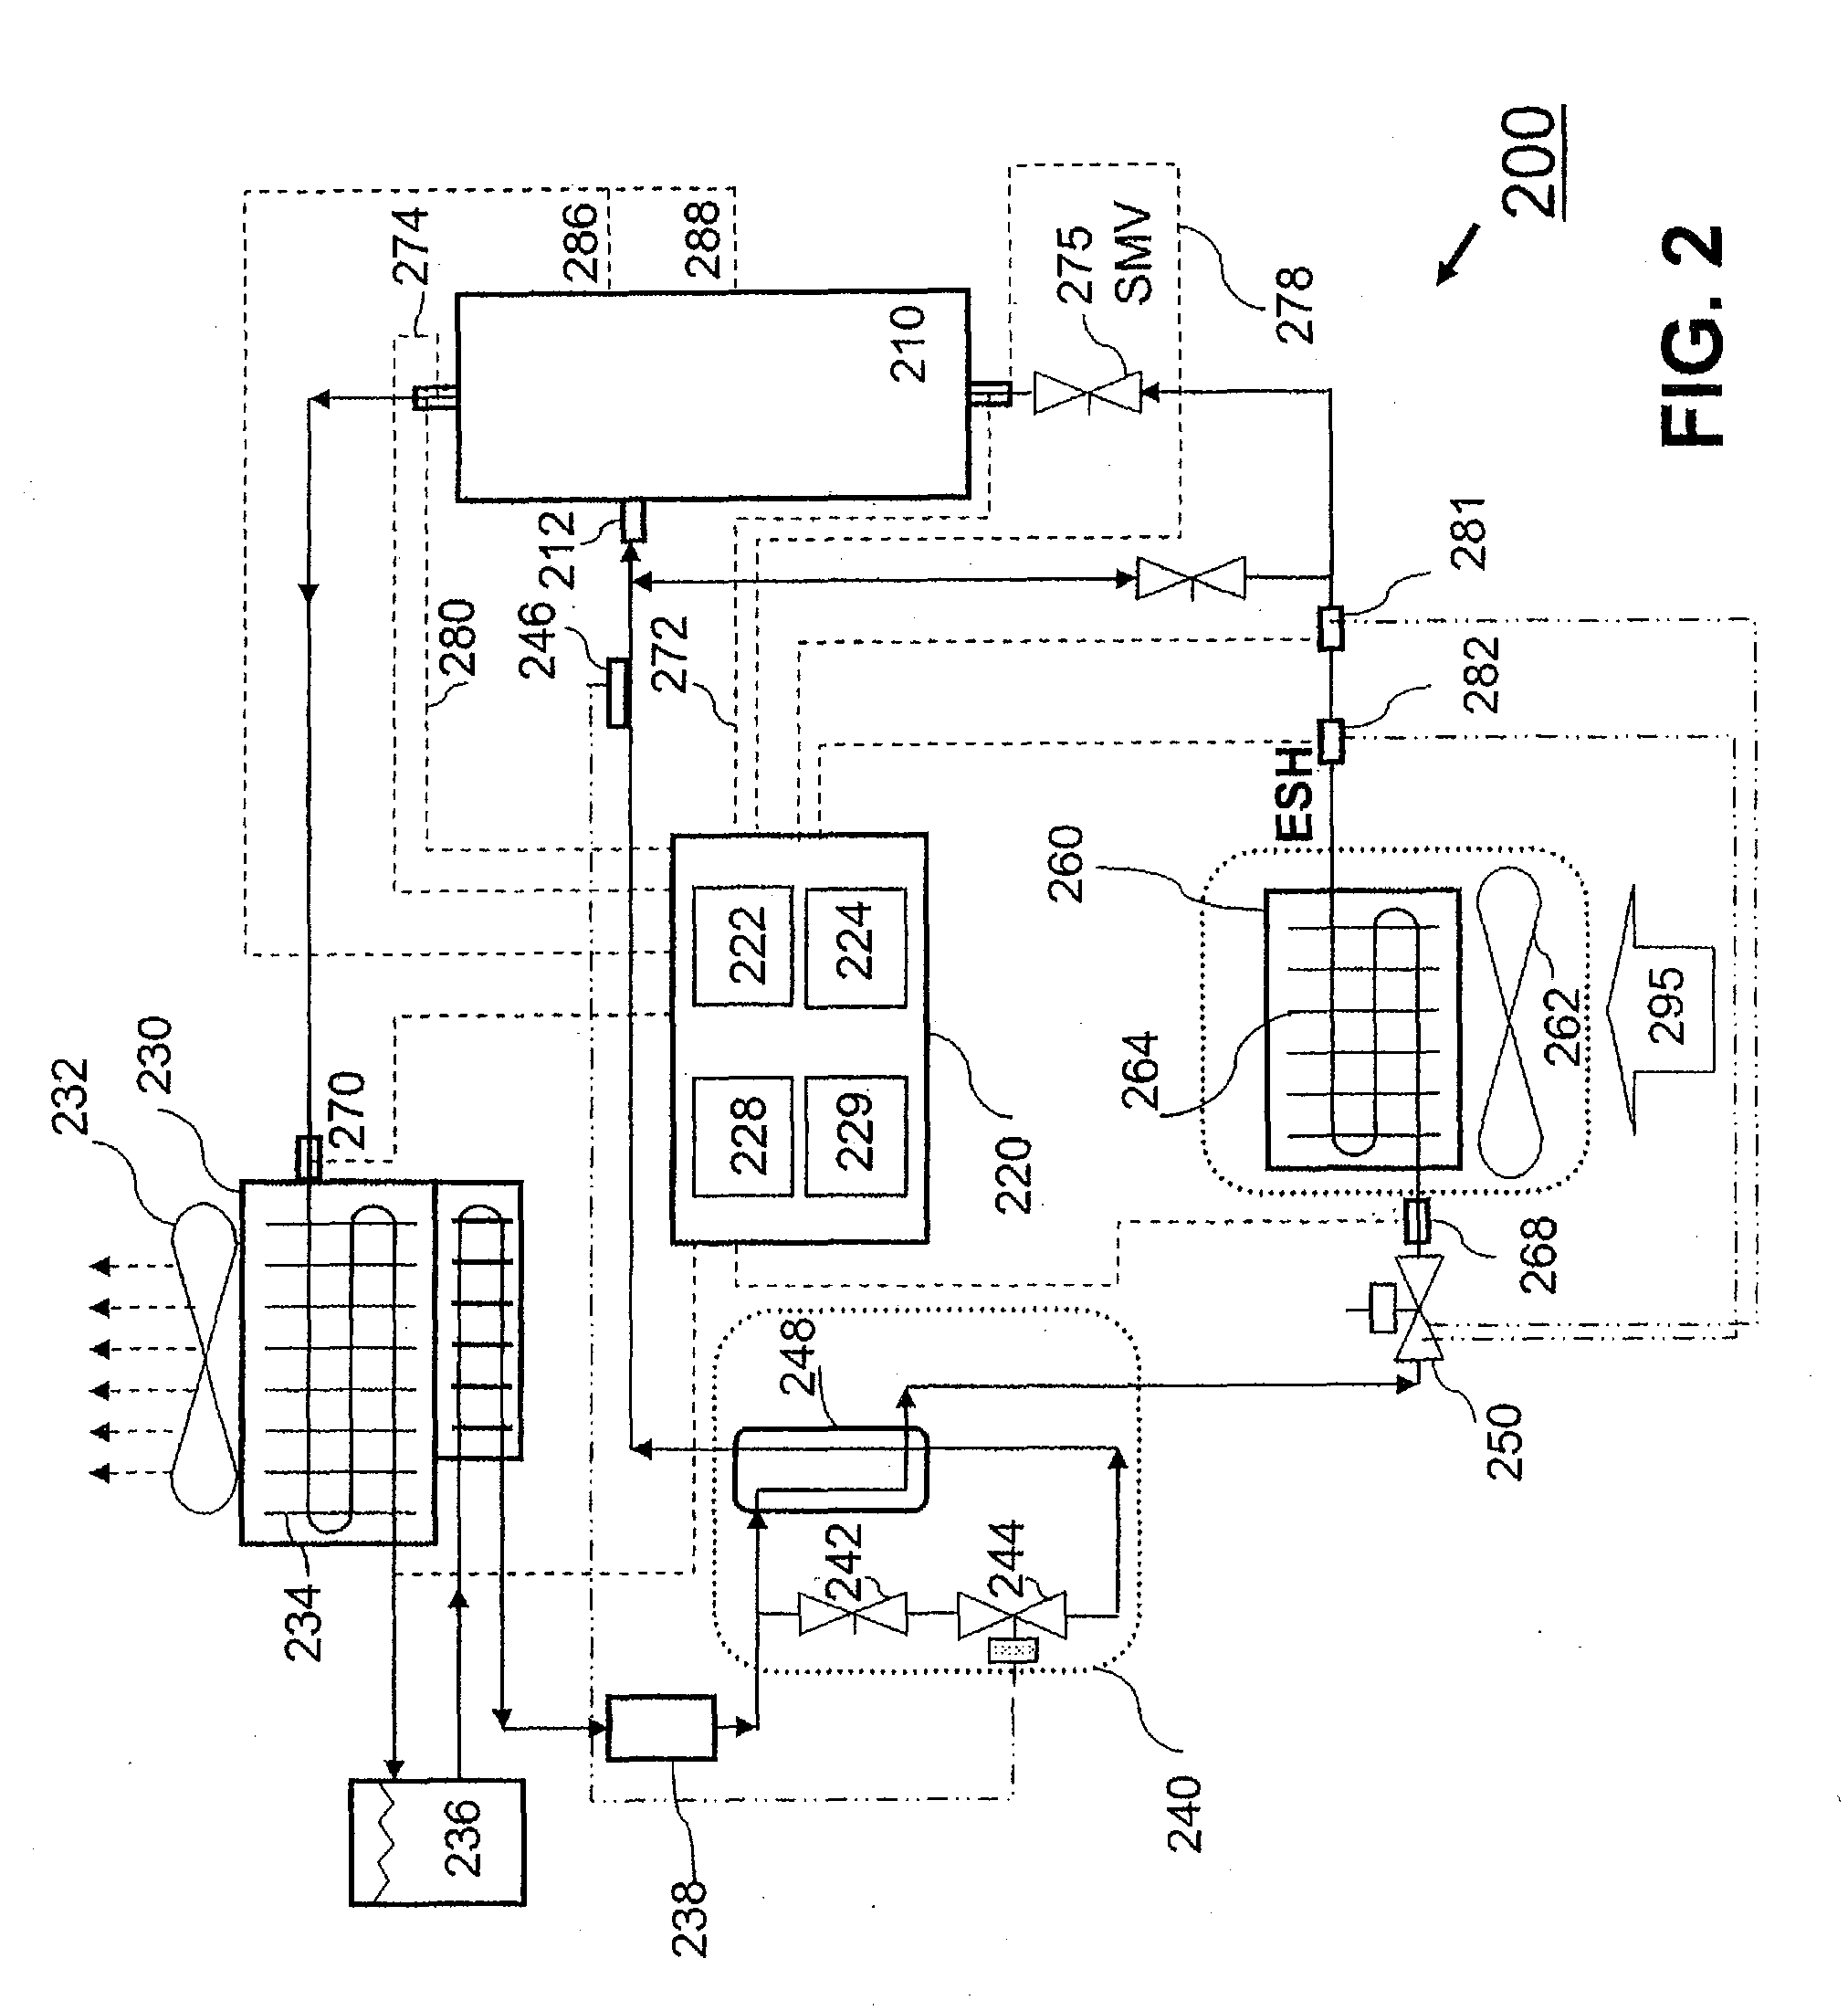 Transport refrigeration system and methods for same to address dynamic conditions